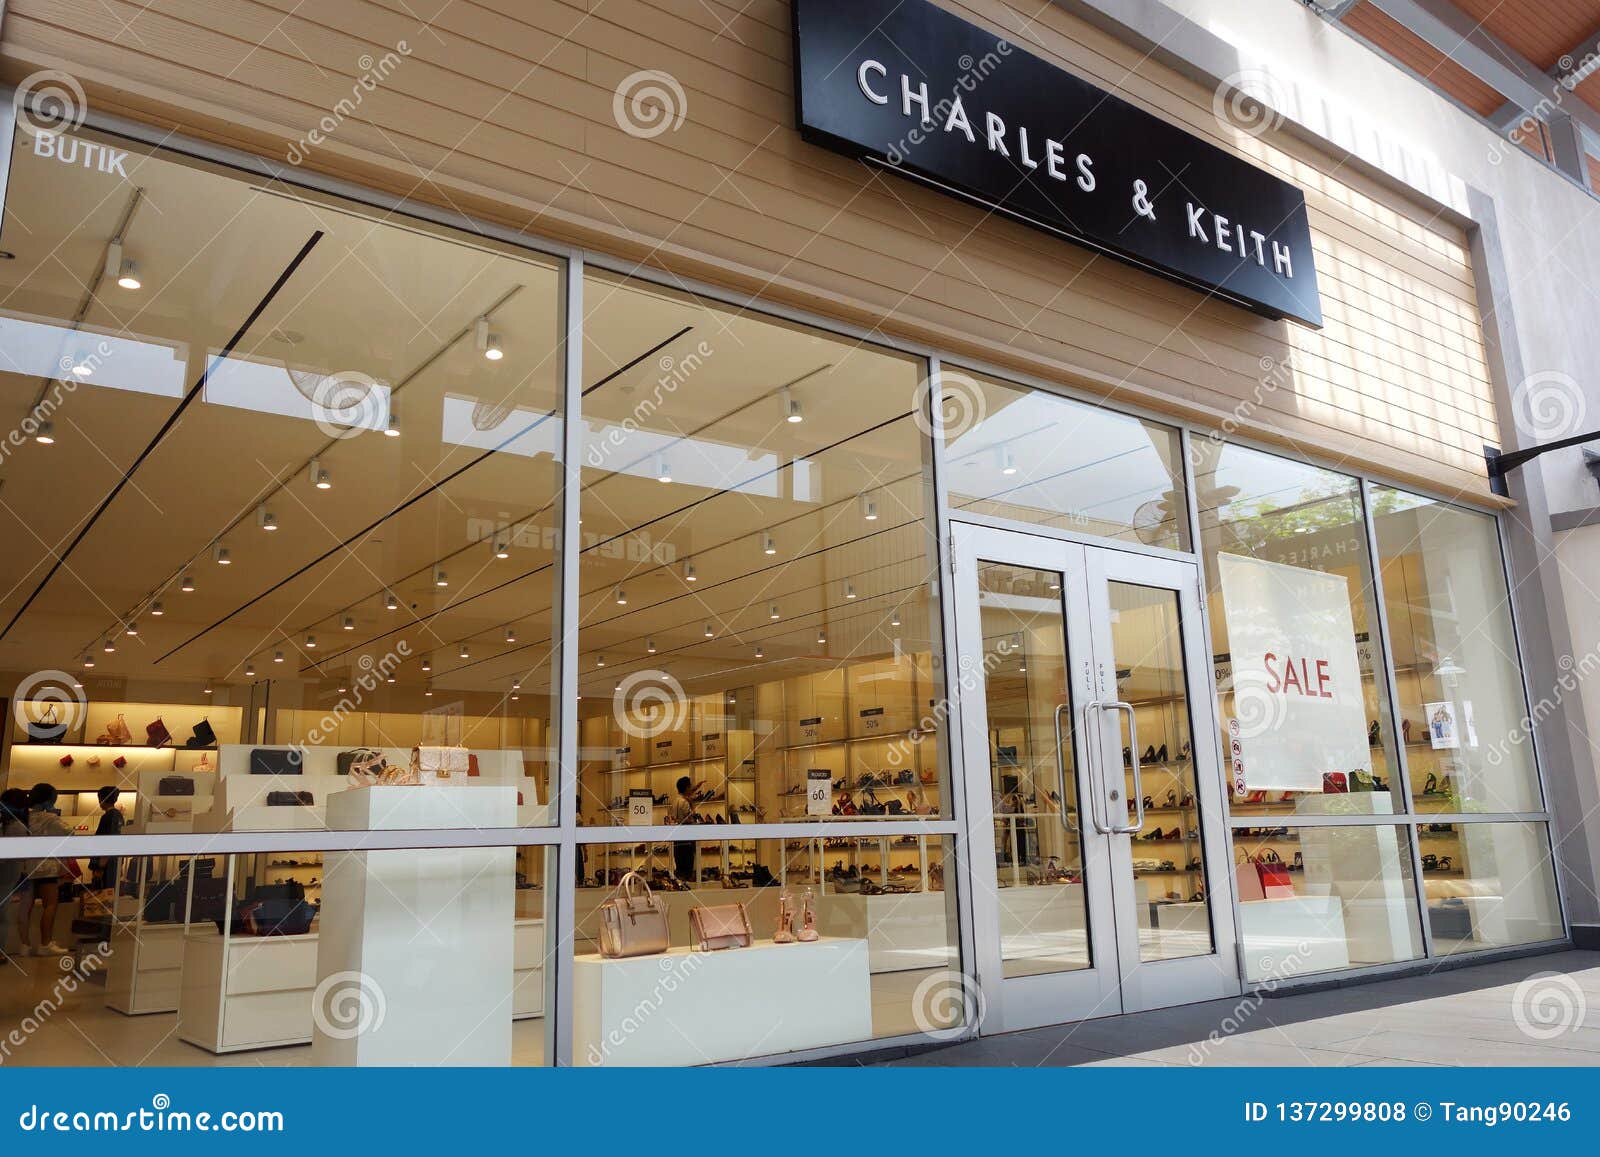 Charles Keith Store In Genting Highlands Malaysia Editorial Stock Photo Image Of Outlet Clothes 137299808